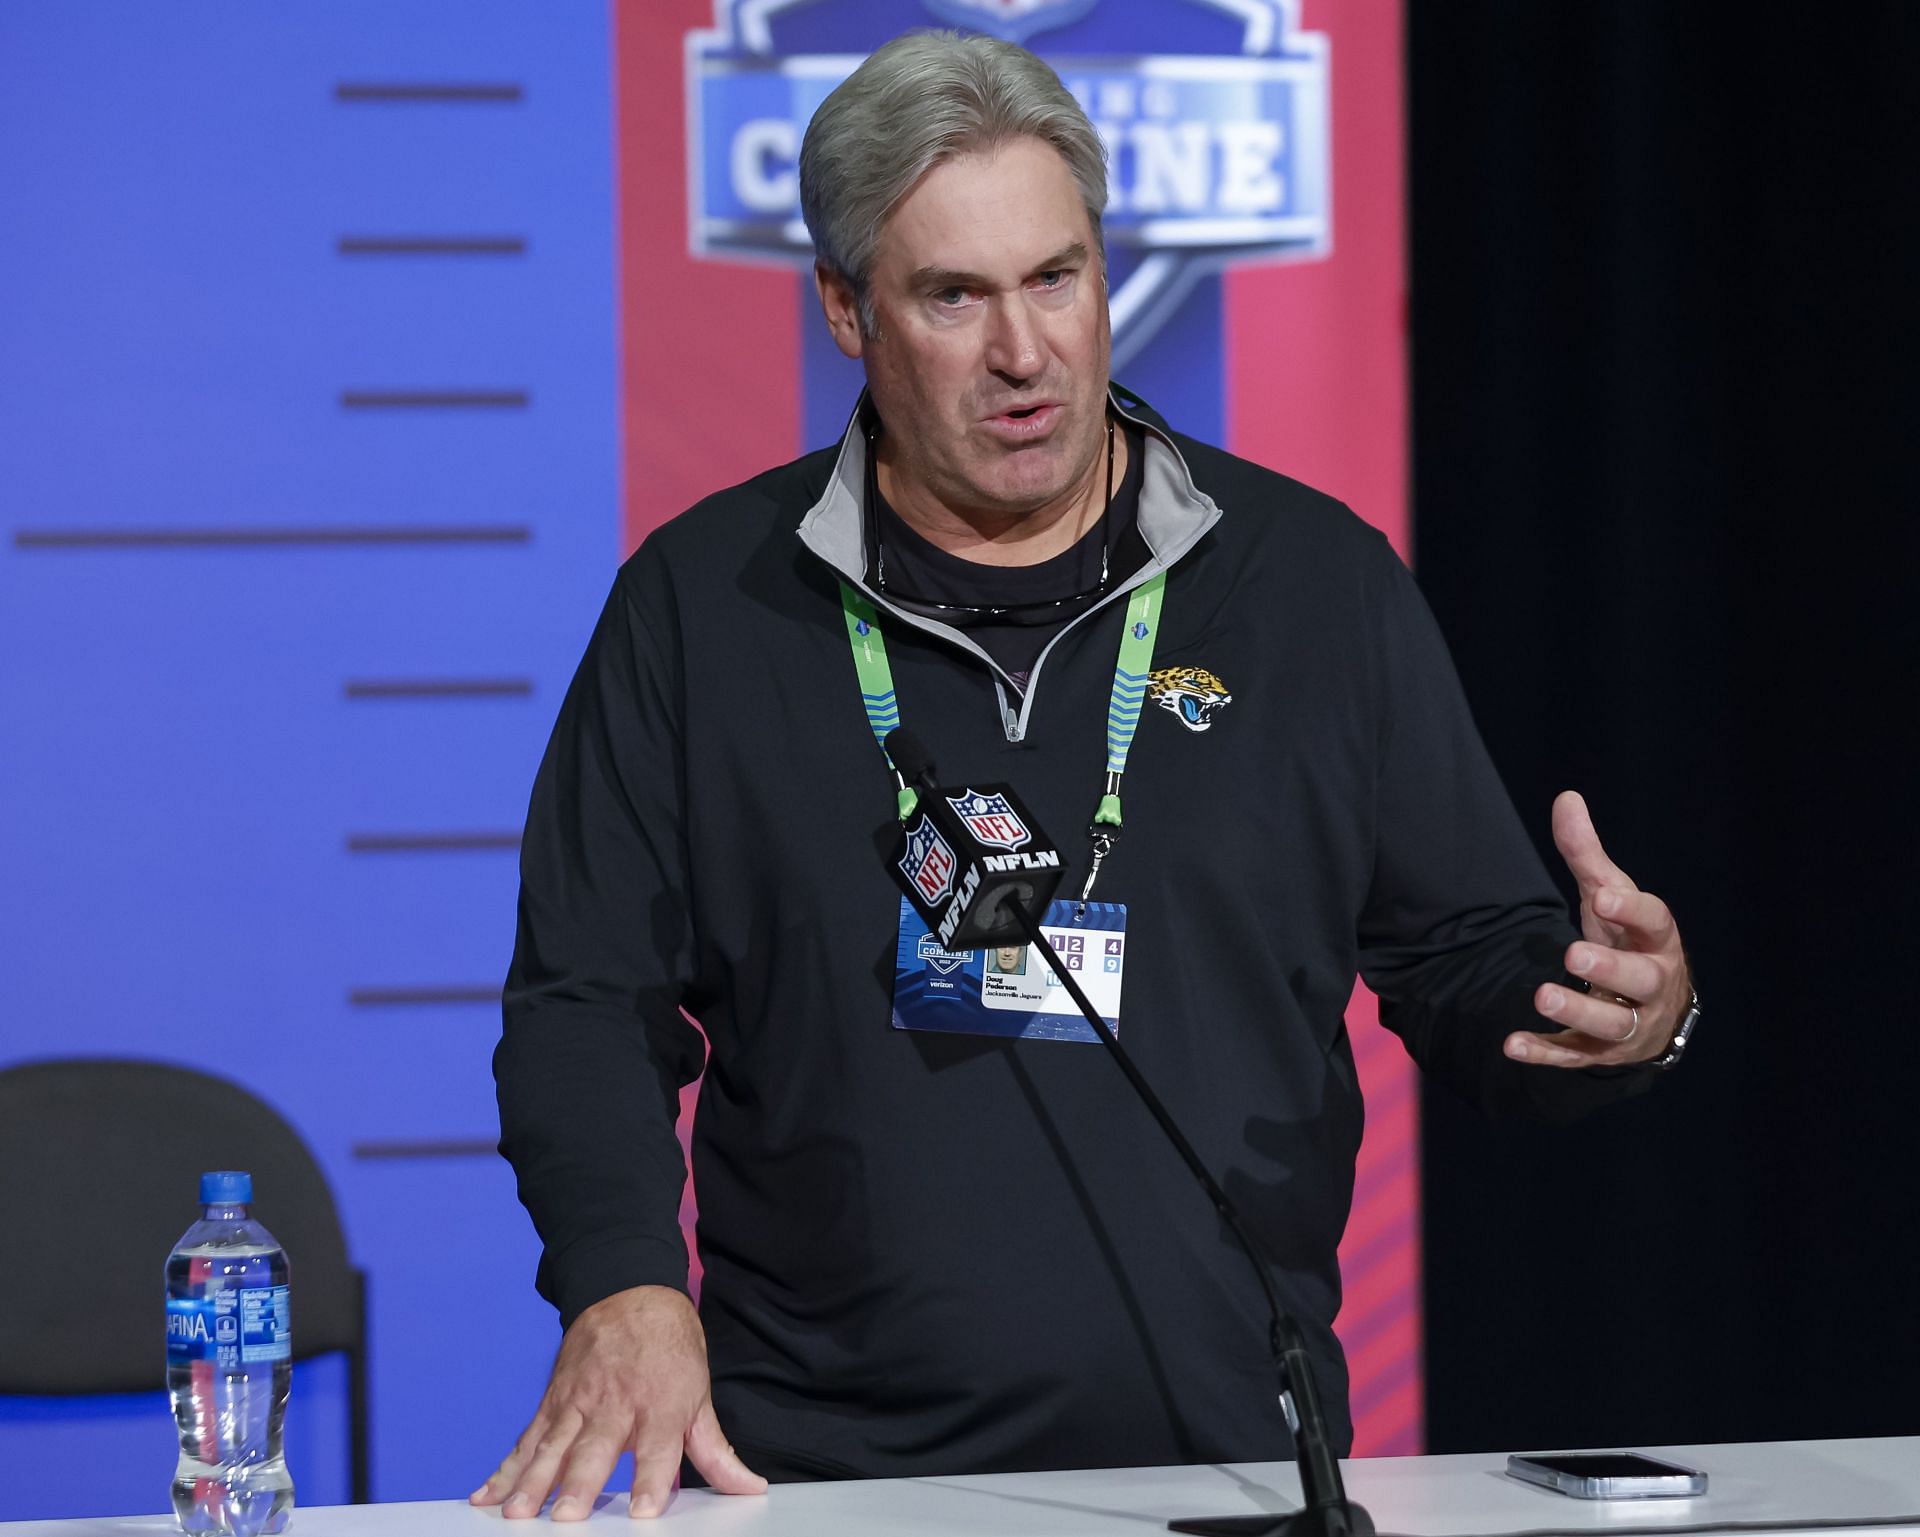 Doug Pederson, HC of the Jacksonville Jaguars, will be selecting first in the 2022 NFL Draft